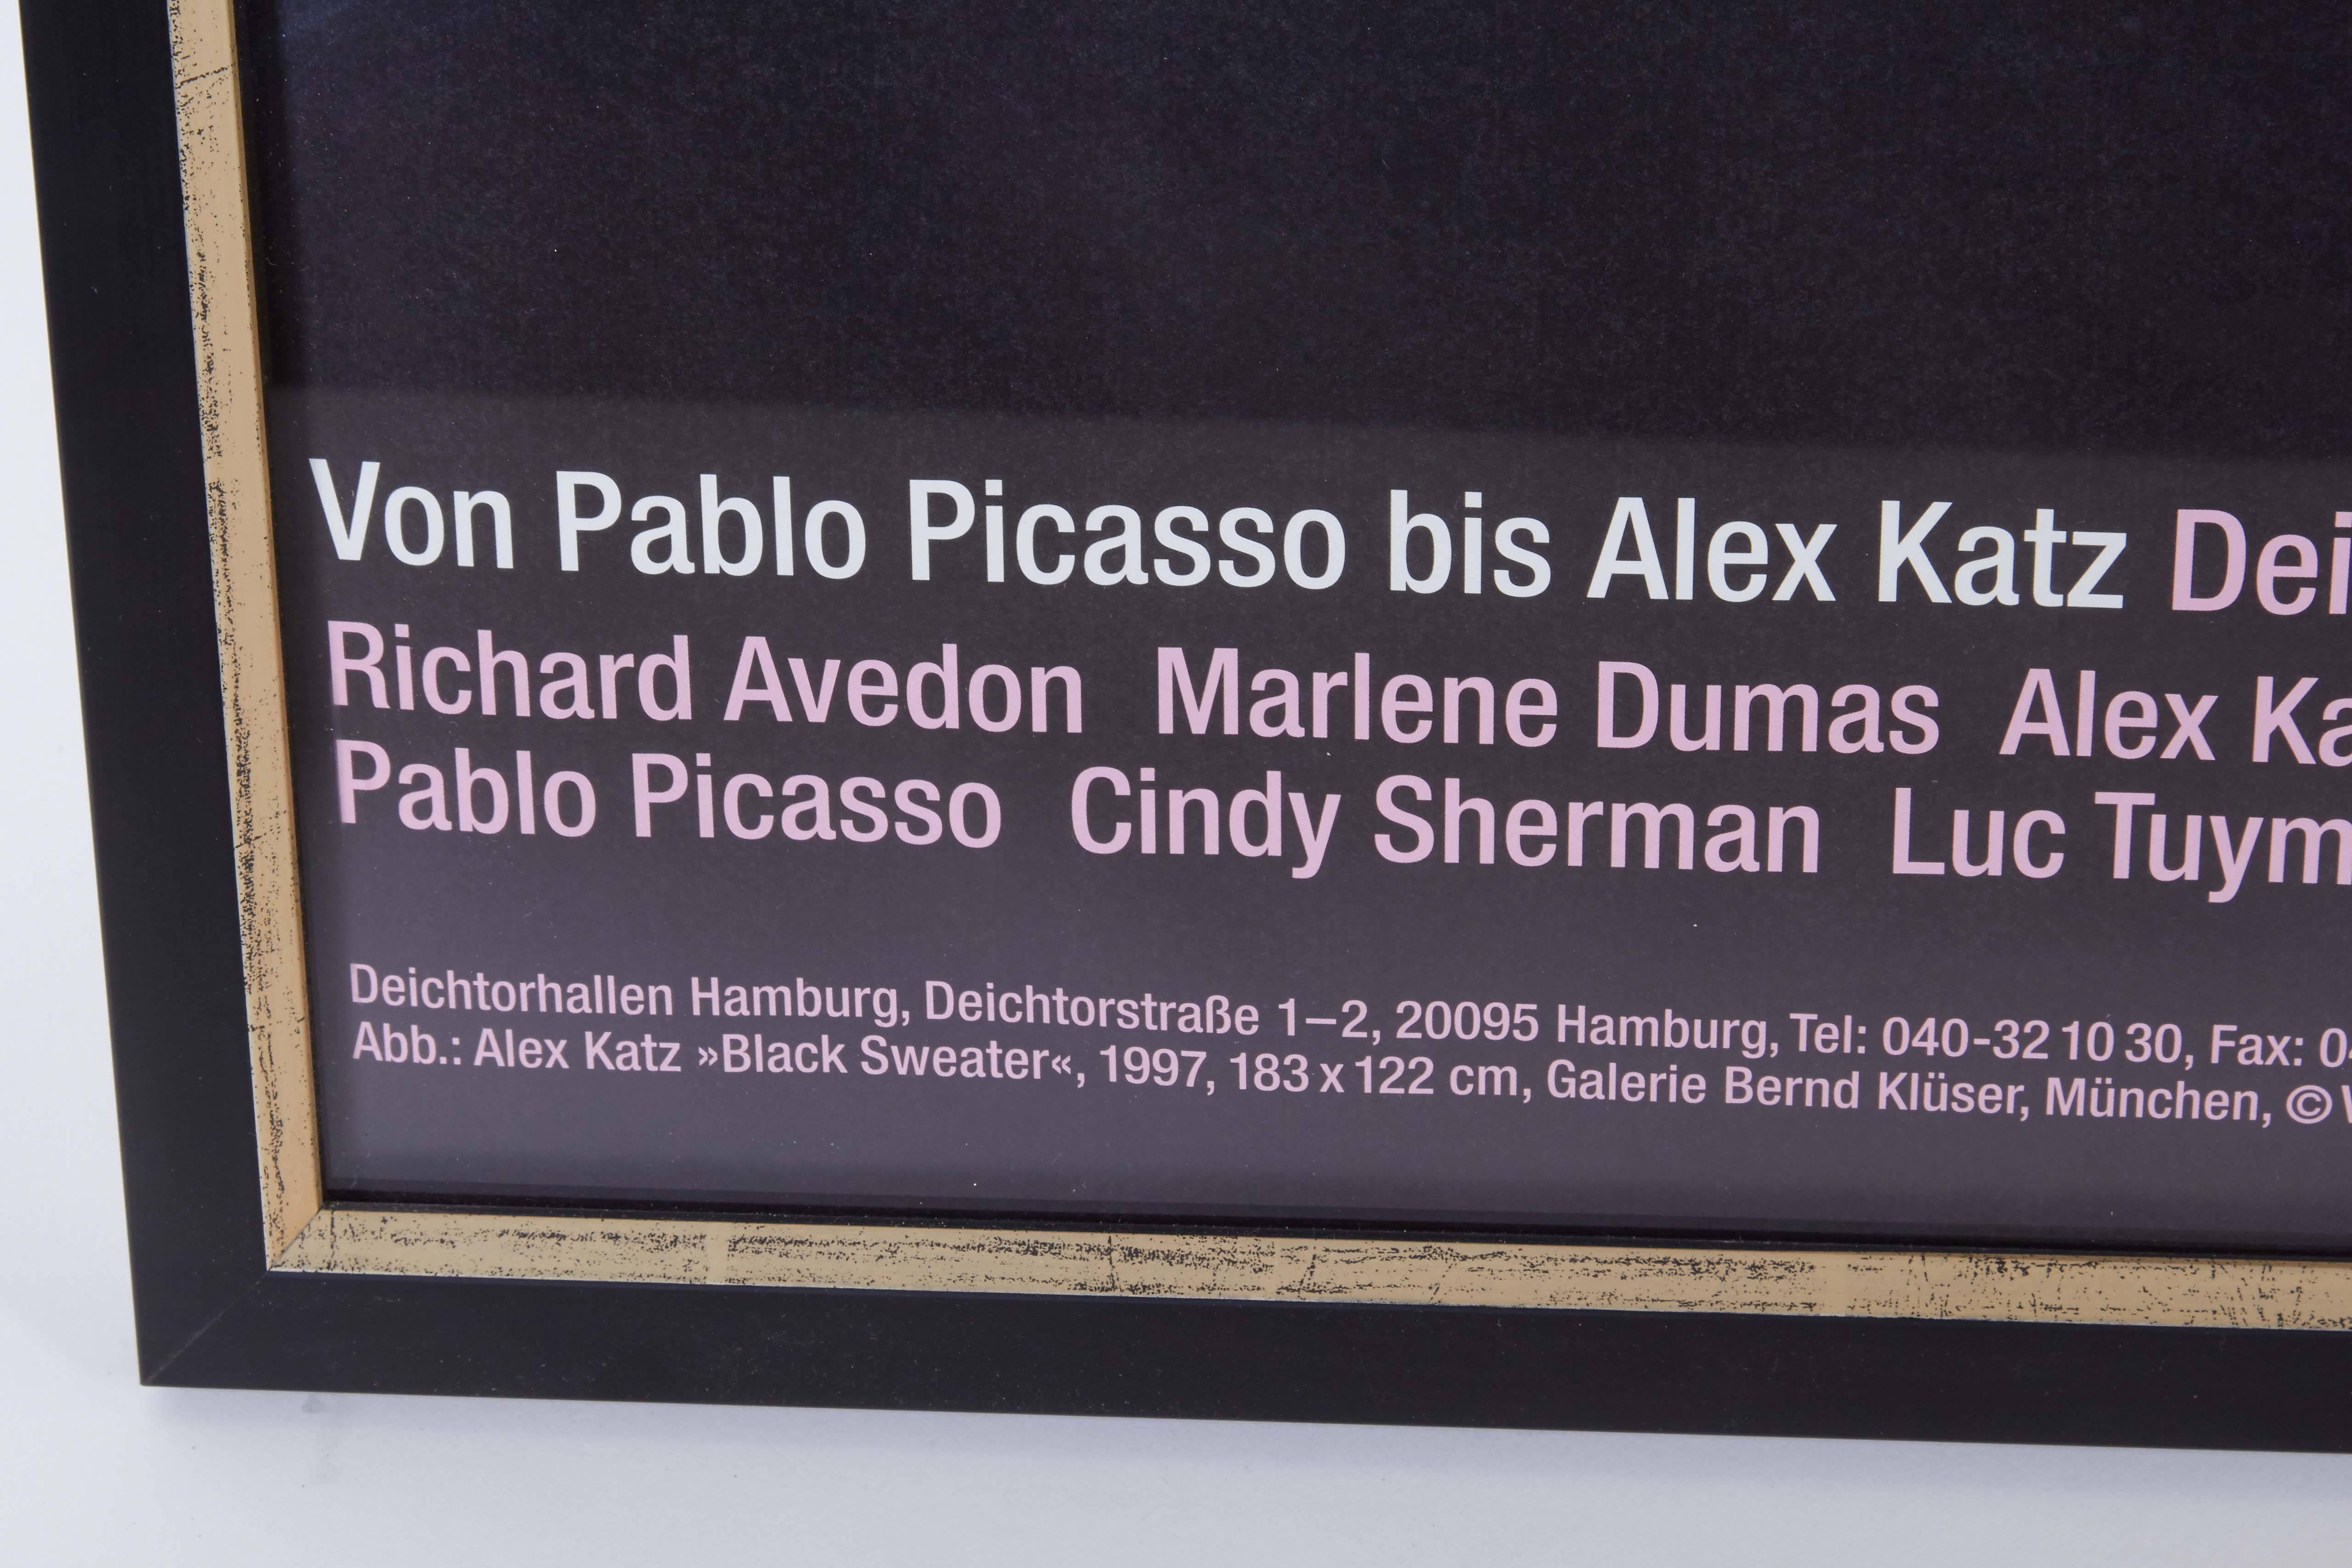 A framed exhibition poster for 'The Contemporary Face - From Pablo Picasso to Alex Katz,' held at the Deichtorhallen Art Center in Hamburg, Germany, running between September 28, 2001 to January 13, 2002 (28.9.2001 - 13.1.2002) and signed by artist